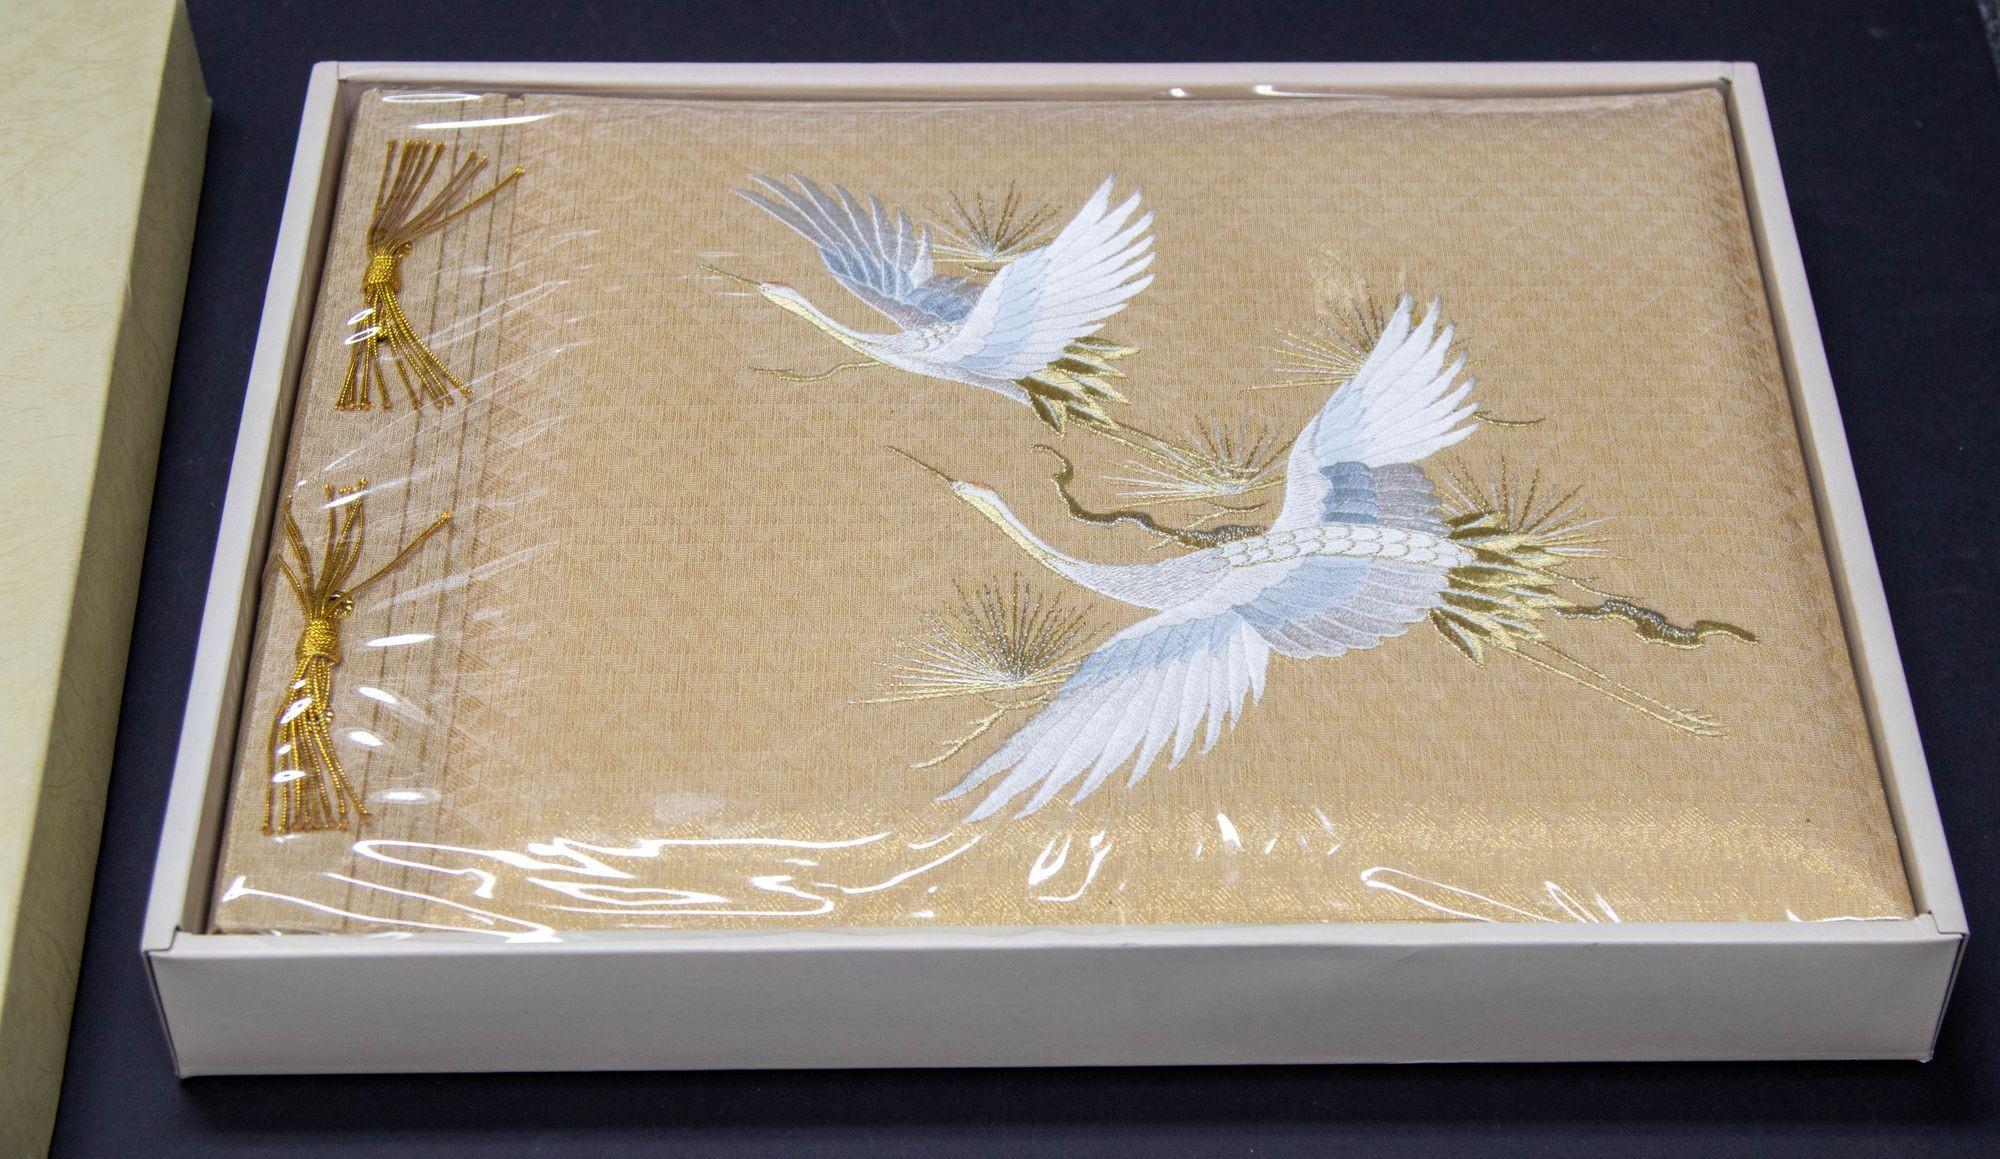 Vintage Japanese Gold Silk Embroidery Wedding Photo Album.
Handcrafted Japanese Sanyo Silk Embroidery Vintage Wedding Photo Album in Original box unused.
Vintage Japanese silk embroidered gold with white cranes photo album.
Japanese Sanyo white and